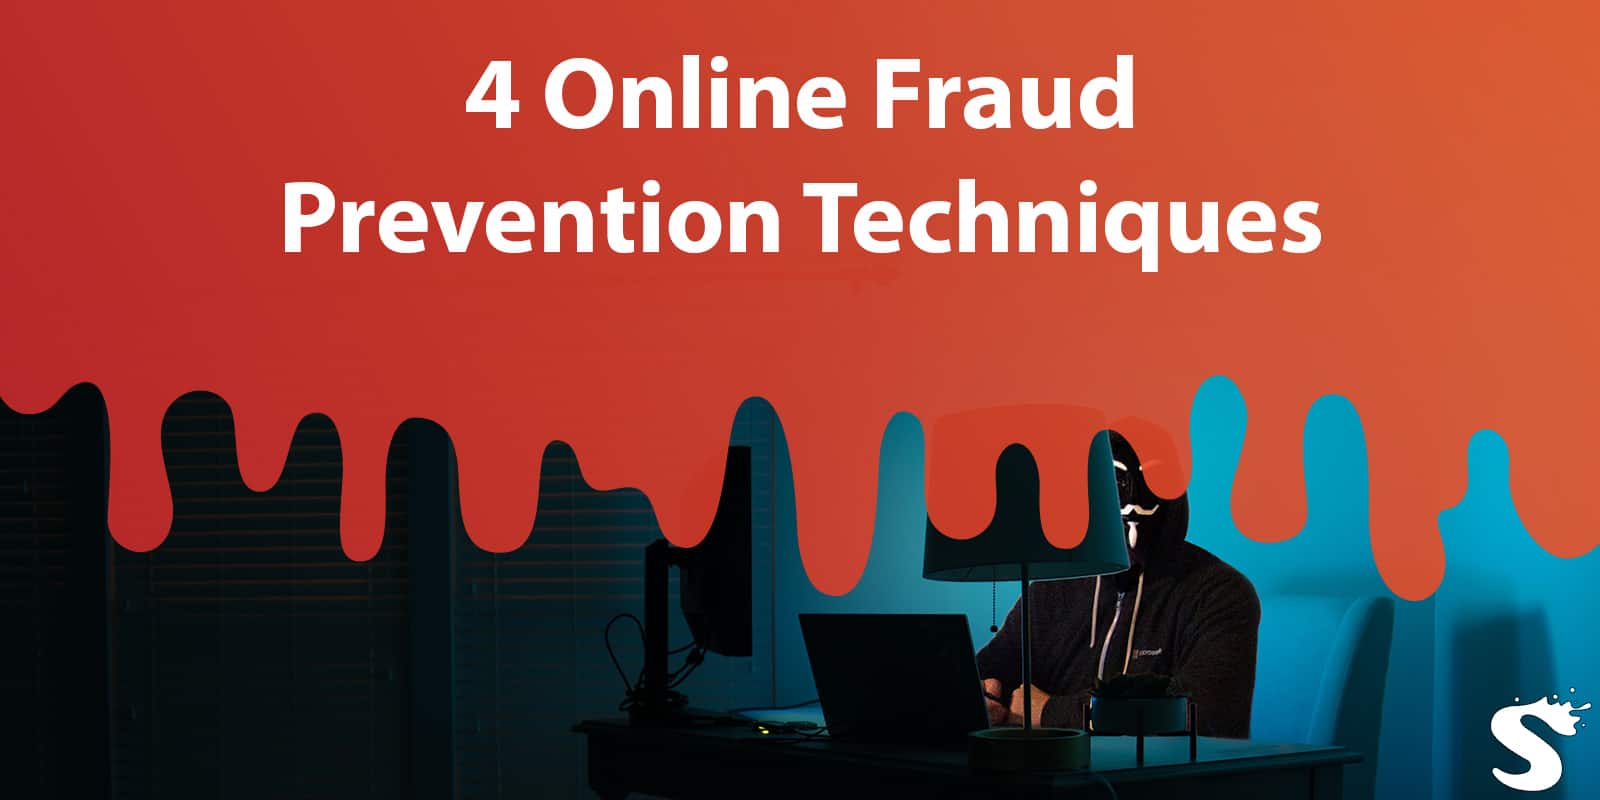 4 Online Fraud Prevention Techniques that every Business Should Try in 2019